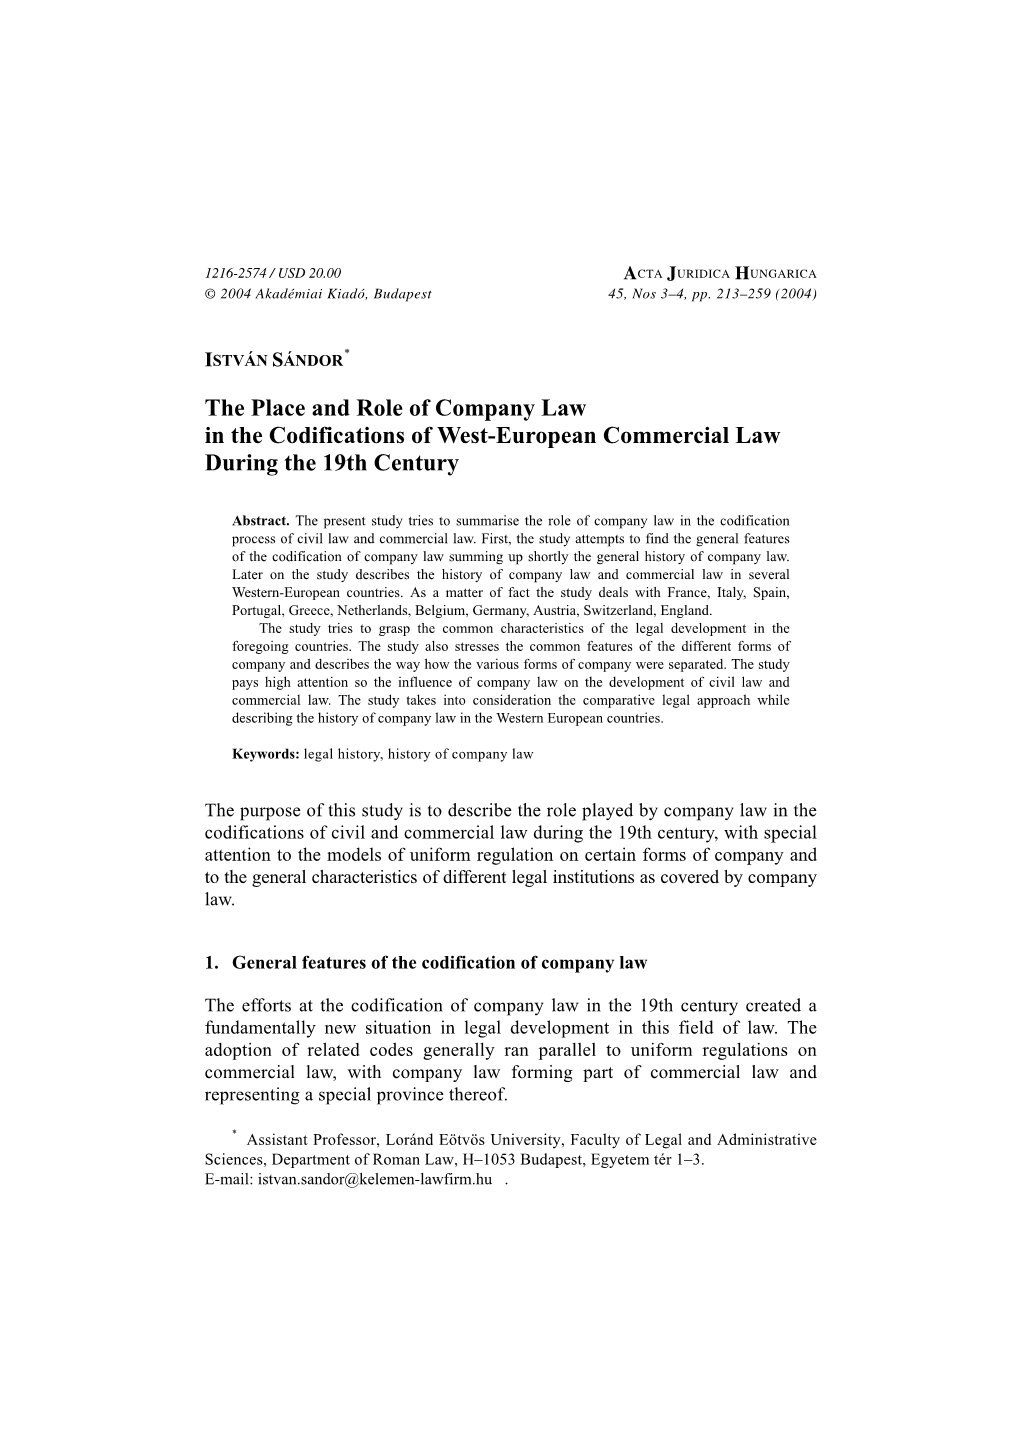 The Place and Role of Company Law in the Codifications of West-European Commercial Law During the 19Th Century